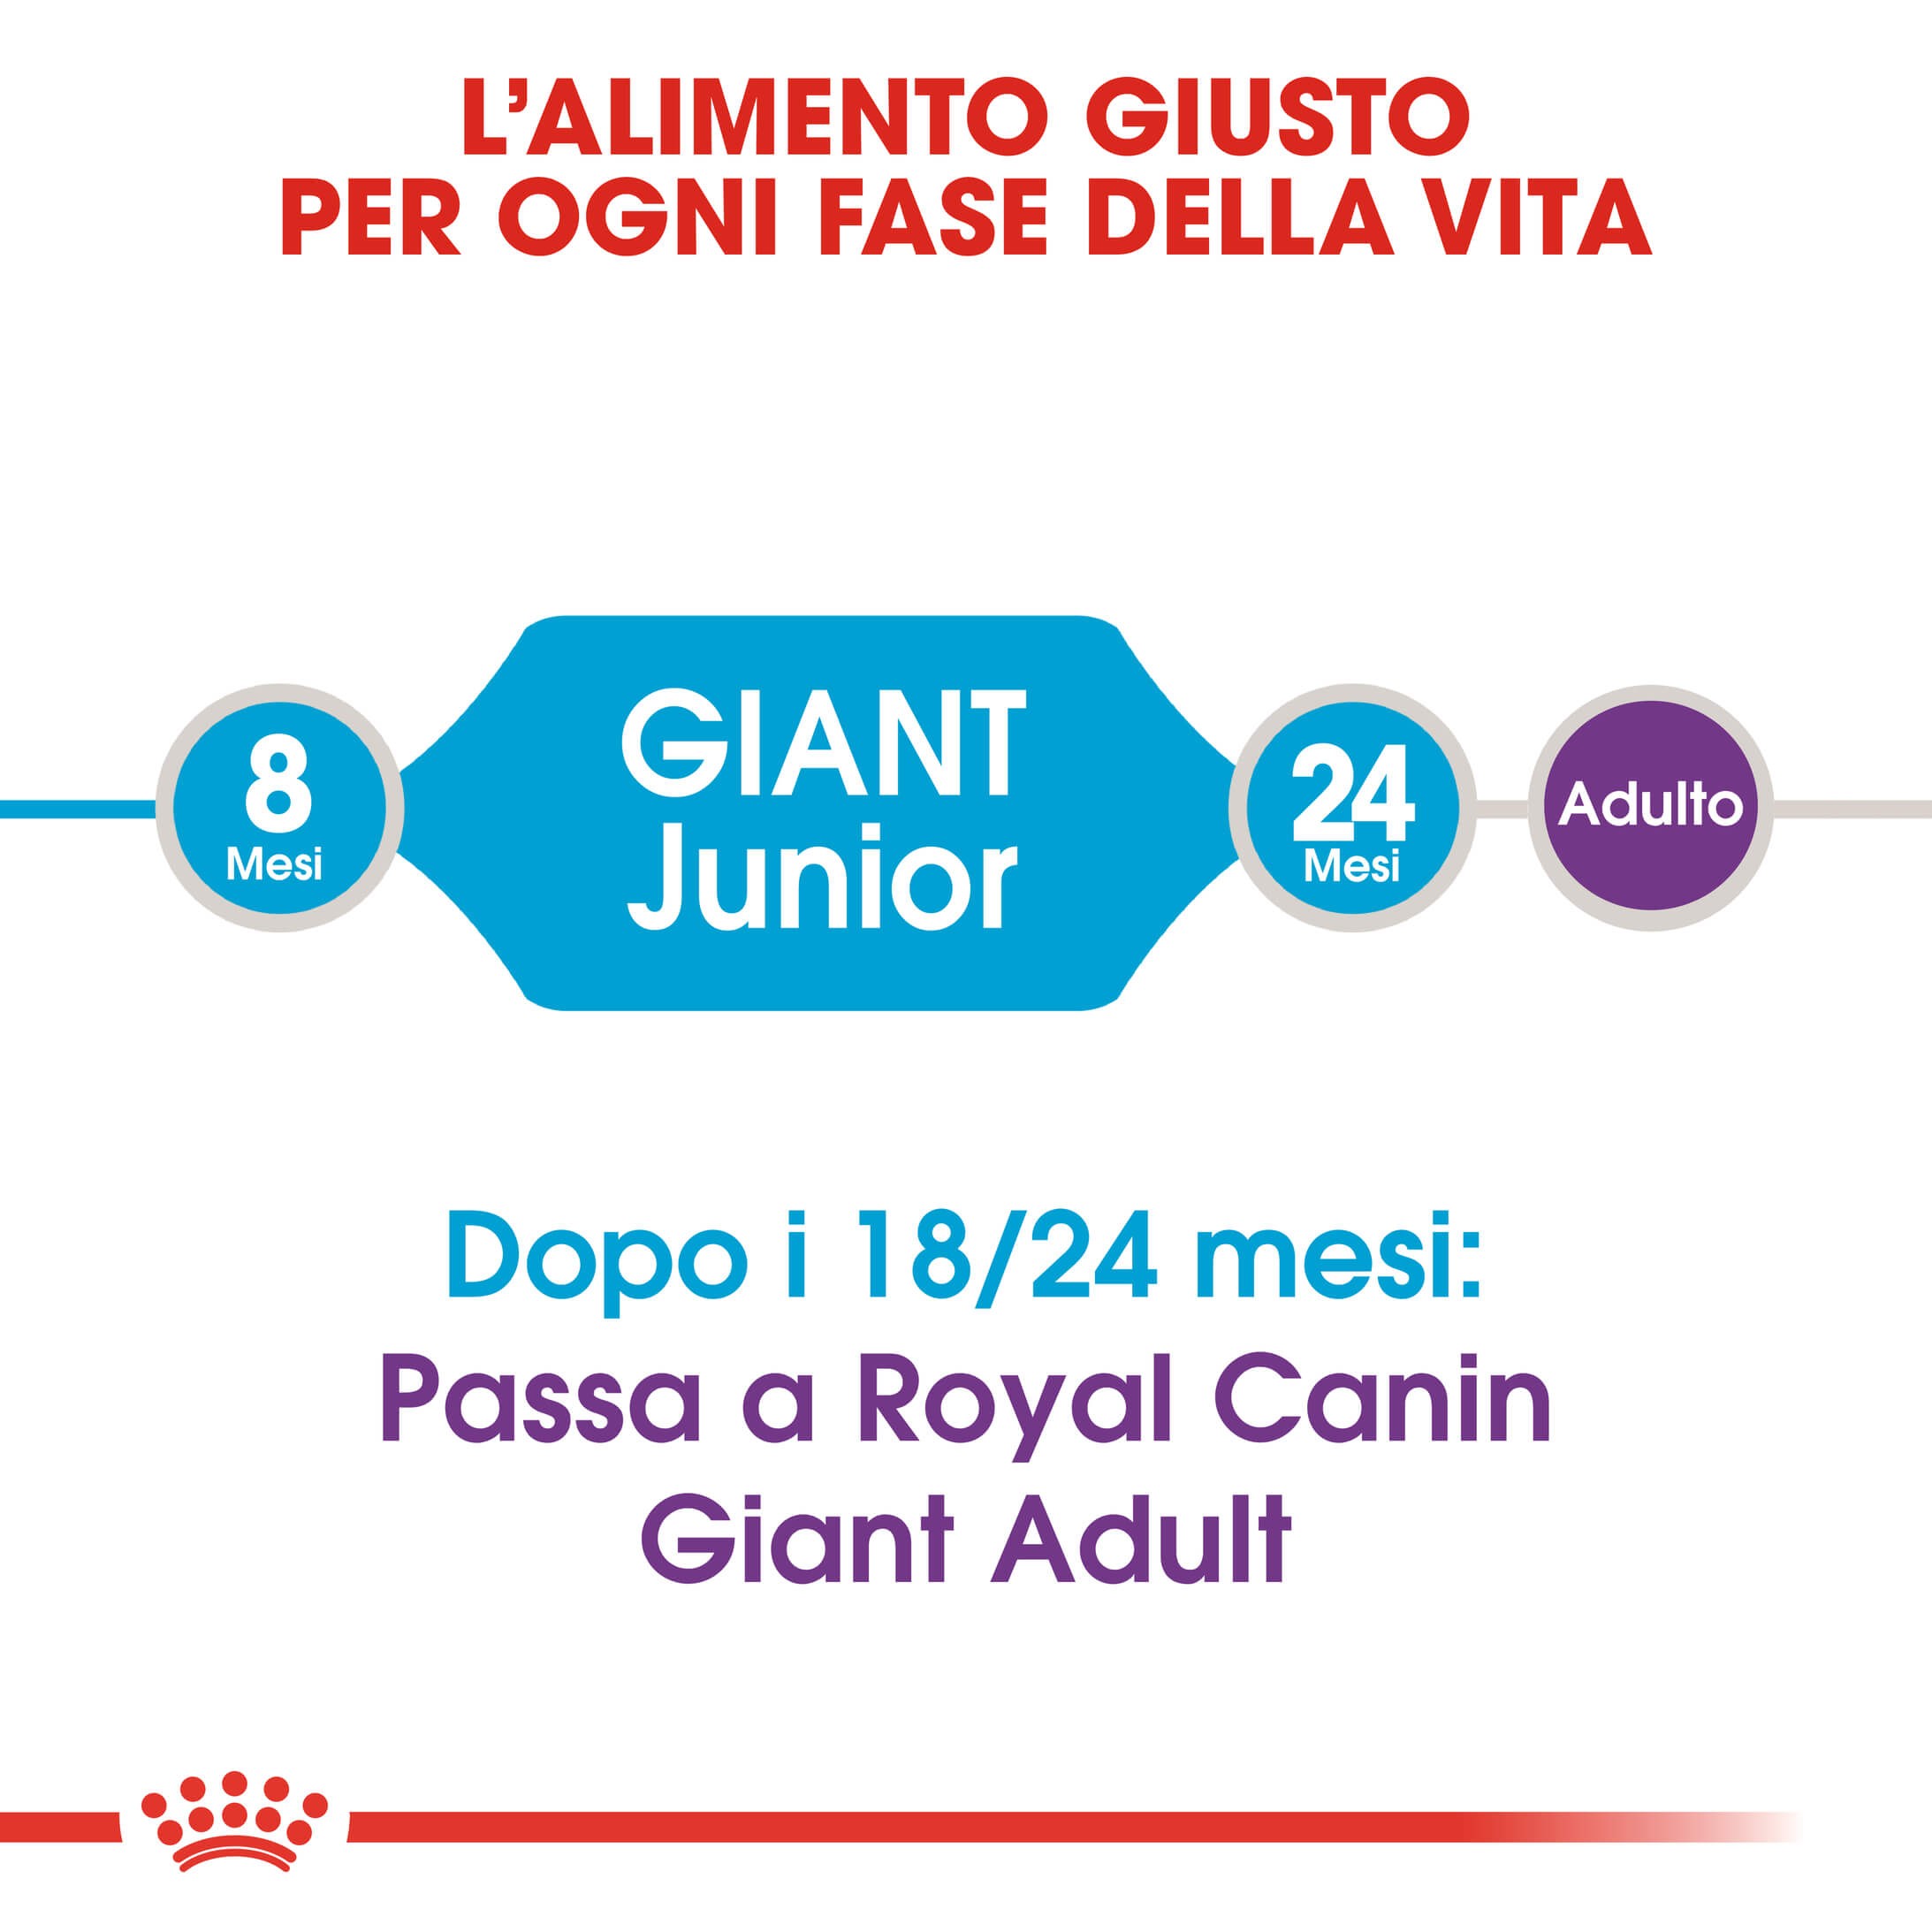 Royal Canin Giant Junior per cane